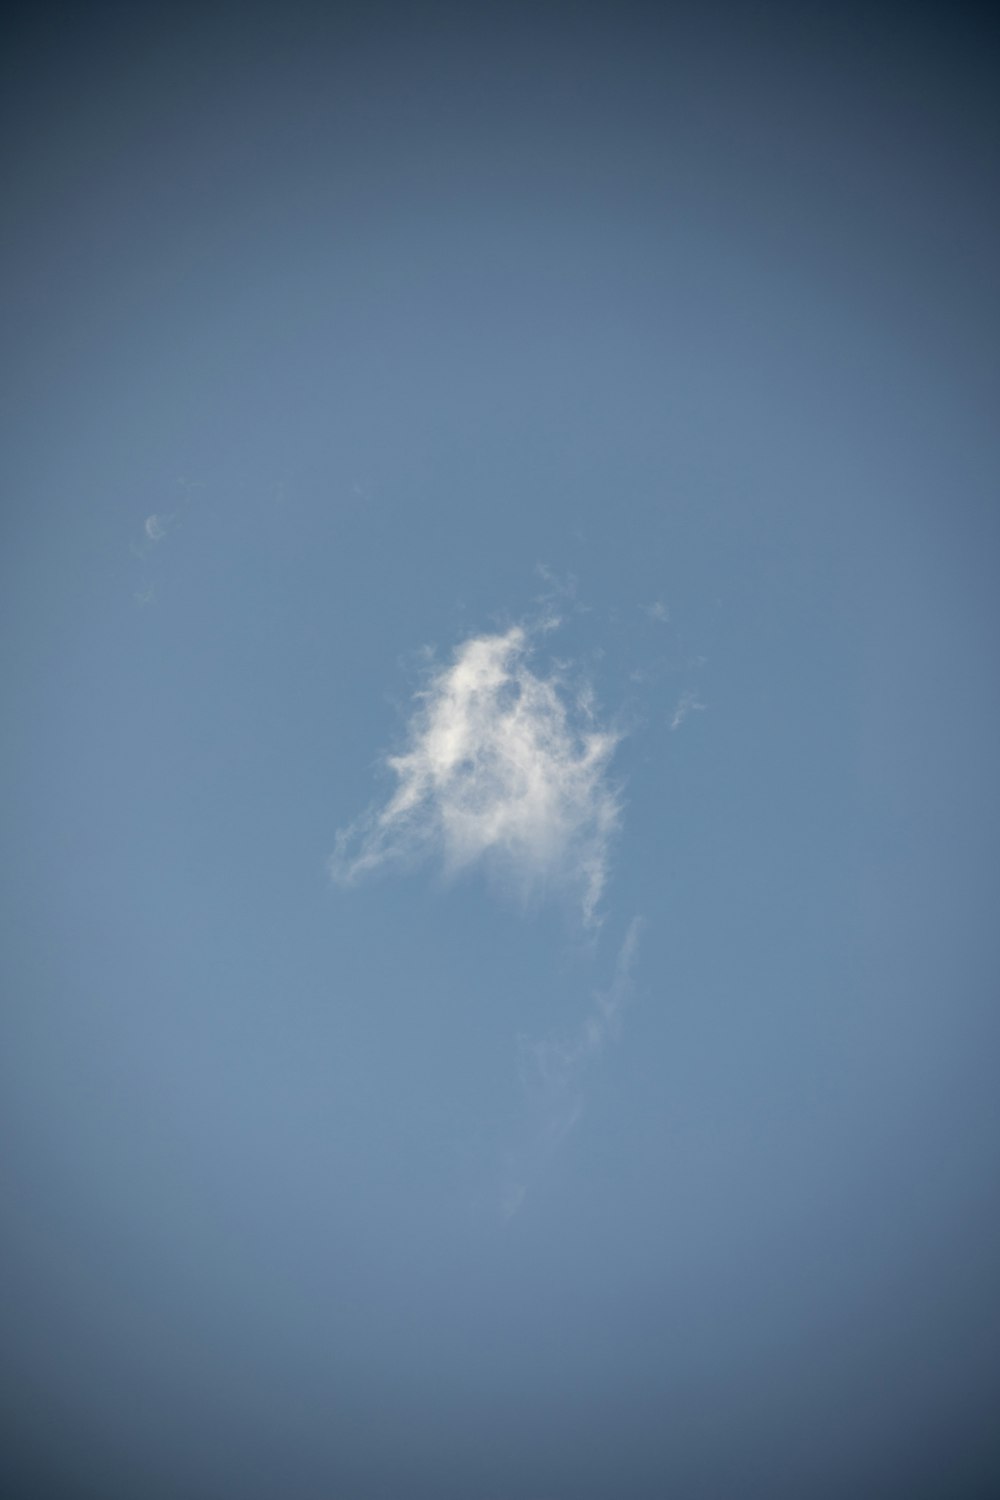 a plane flying in the sky with a cloud in the middle